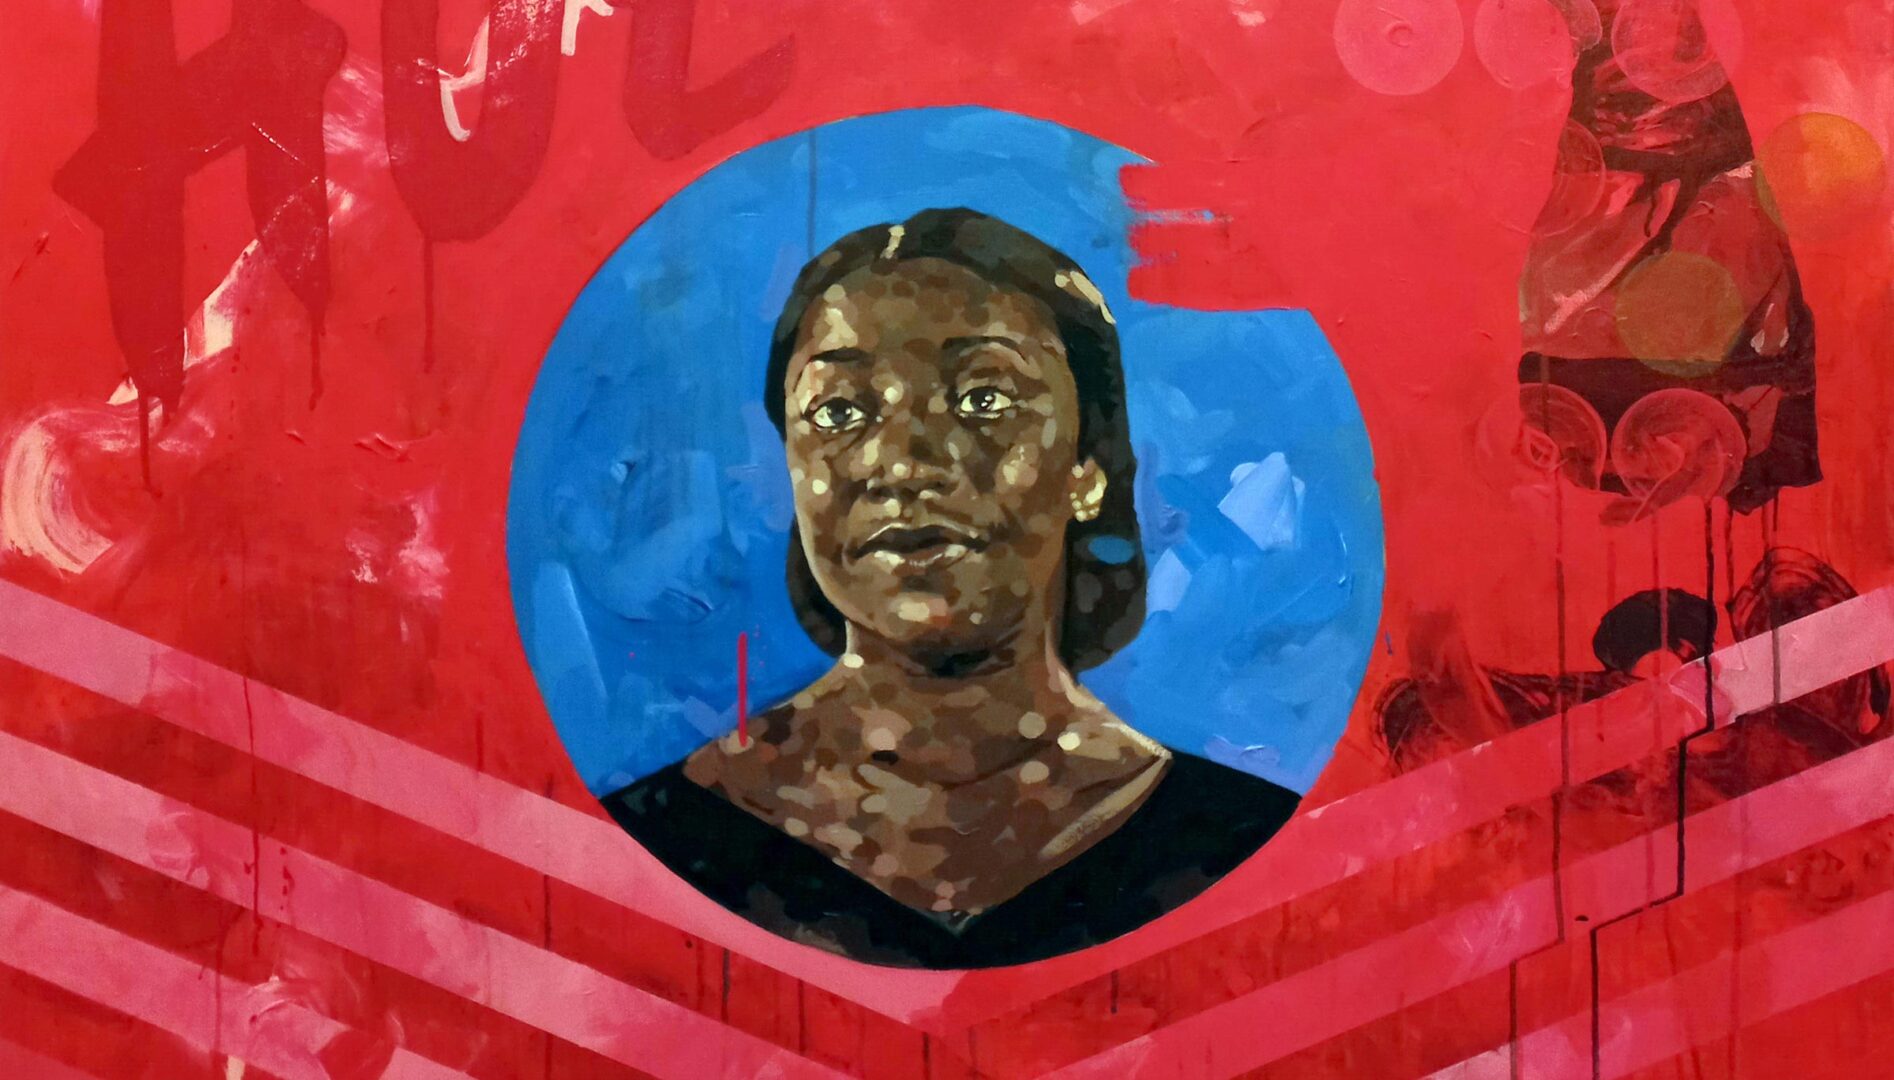 Painting with an image of a black woman with her head titled upwards and her hair pulled back in the center surrounded by a blue circle. Surrounding the woman's image are red paint, the word "HUE" in the top left corner and 6 circles of different colors in the lower right corner. Below her image are a series of chevrons pointed downward.